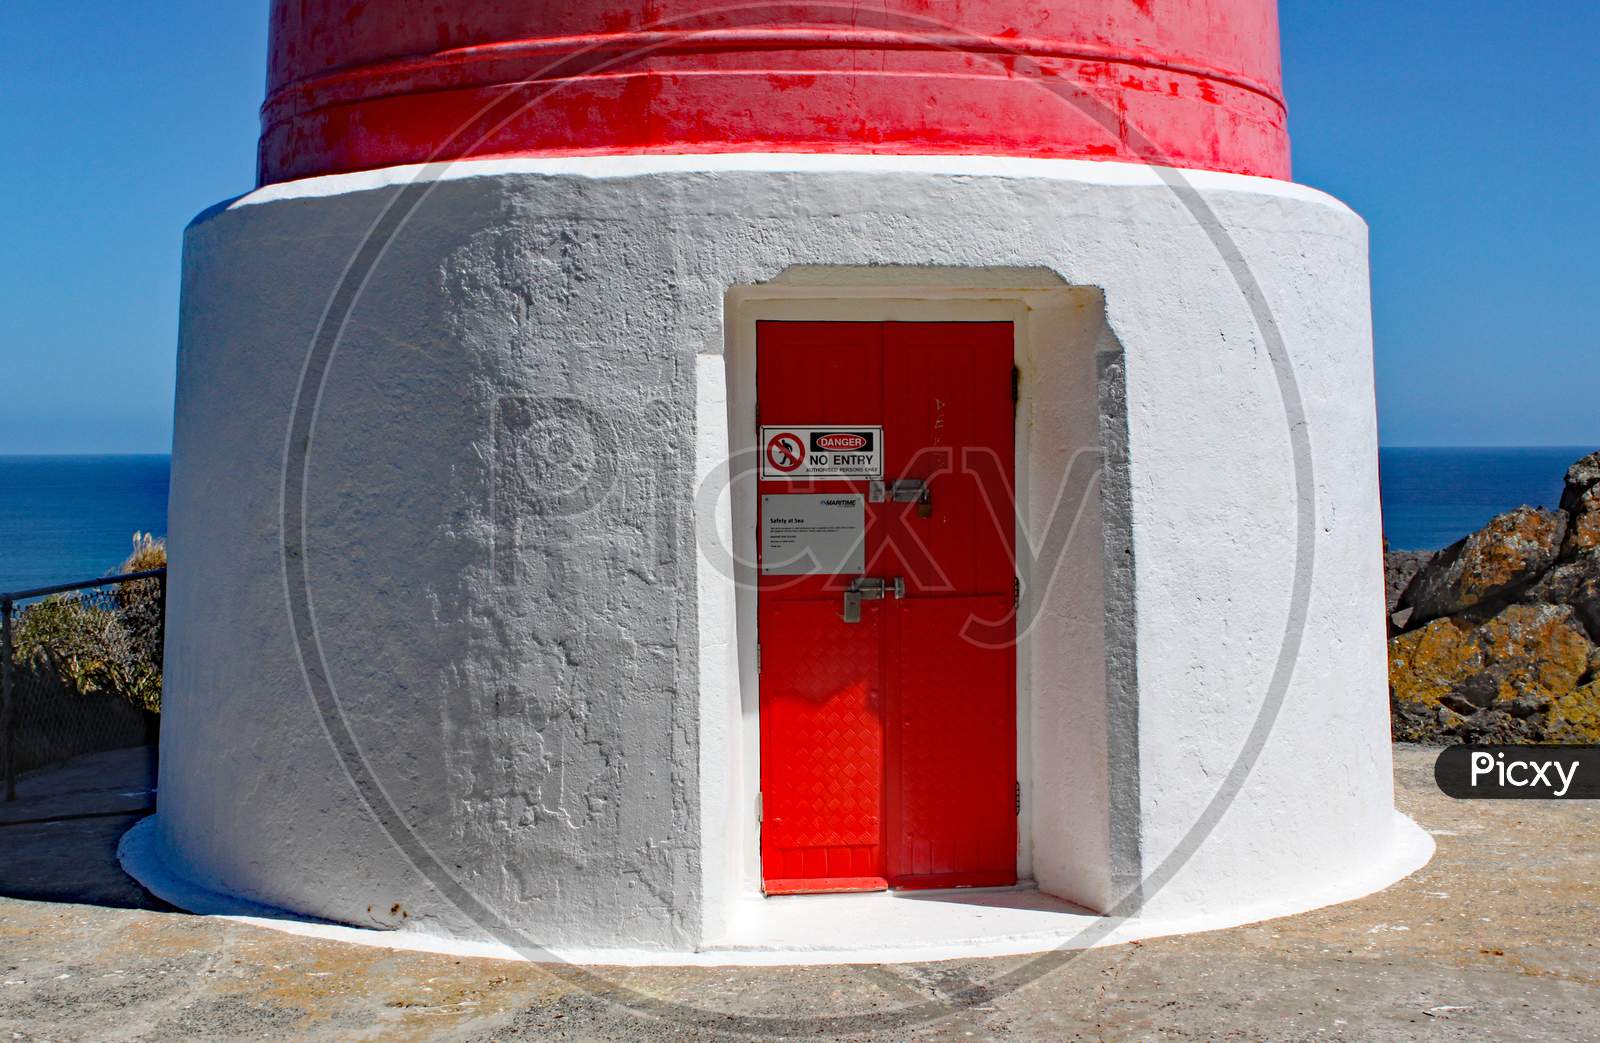 The Entrance Door Of The Red And White Striped Lighthouse At Cape Palliser On North Island, New Zealand. The Lighthouse Was Built In 1897 And Was Originally Fueled By Oil.